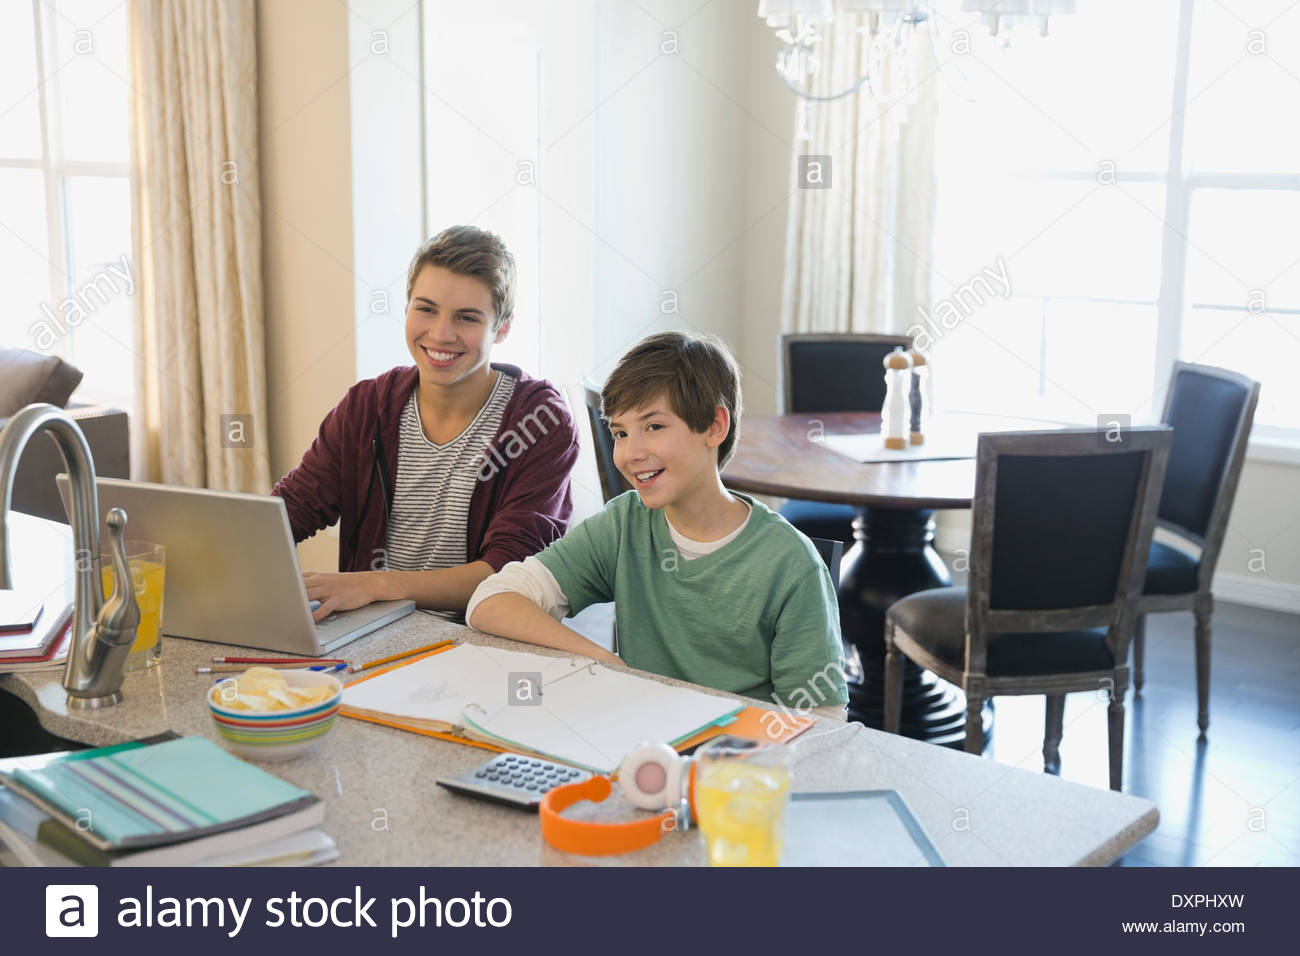 Smiling brothers studying at home Banque D'Images